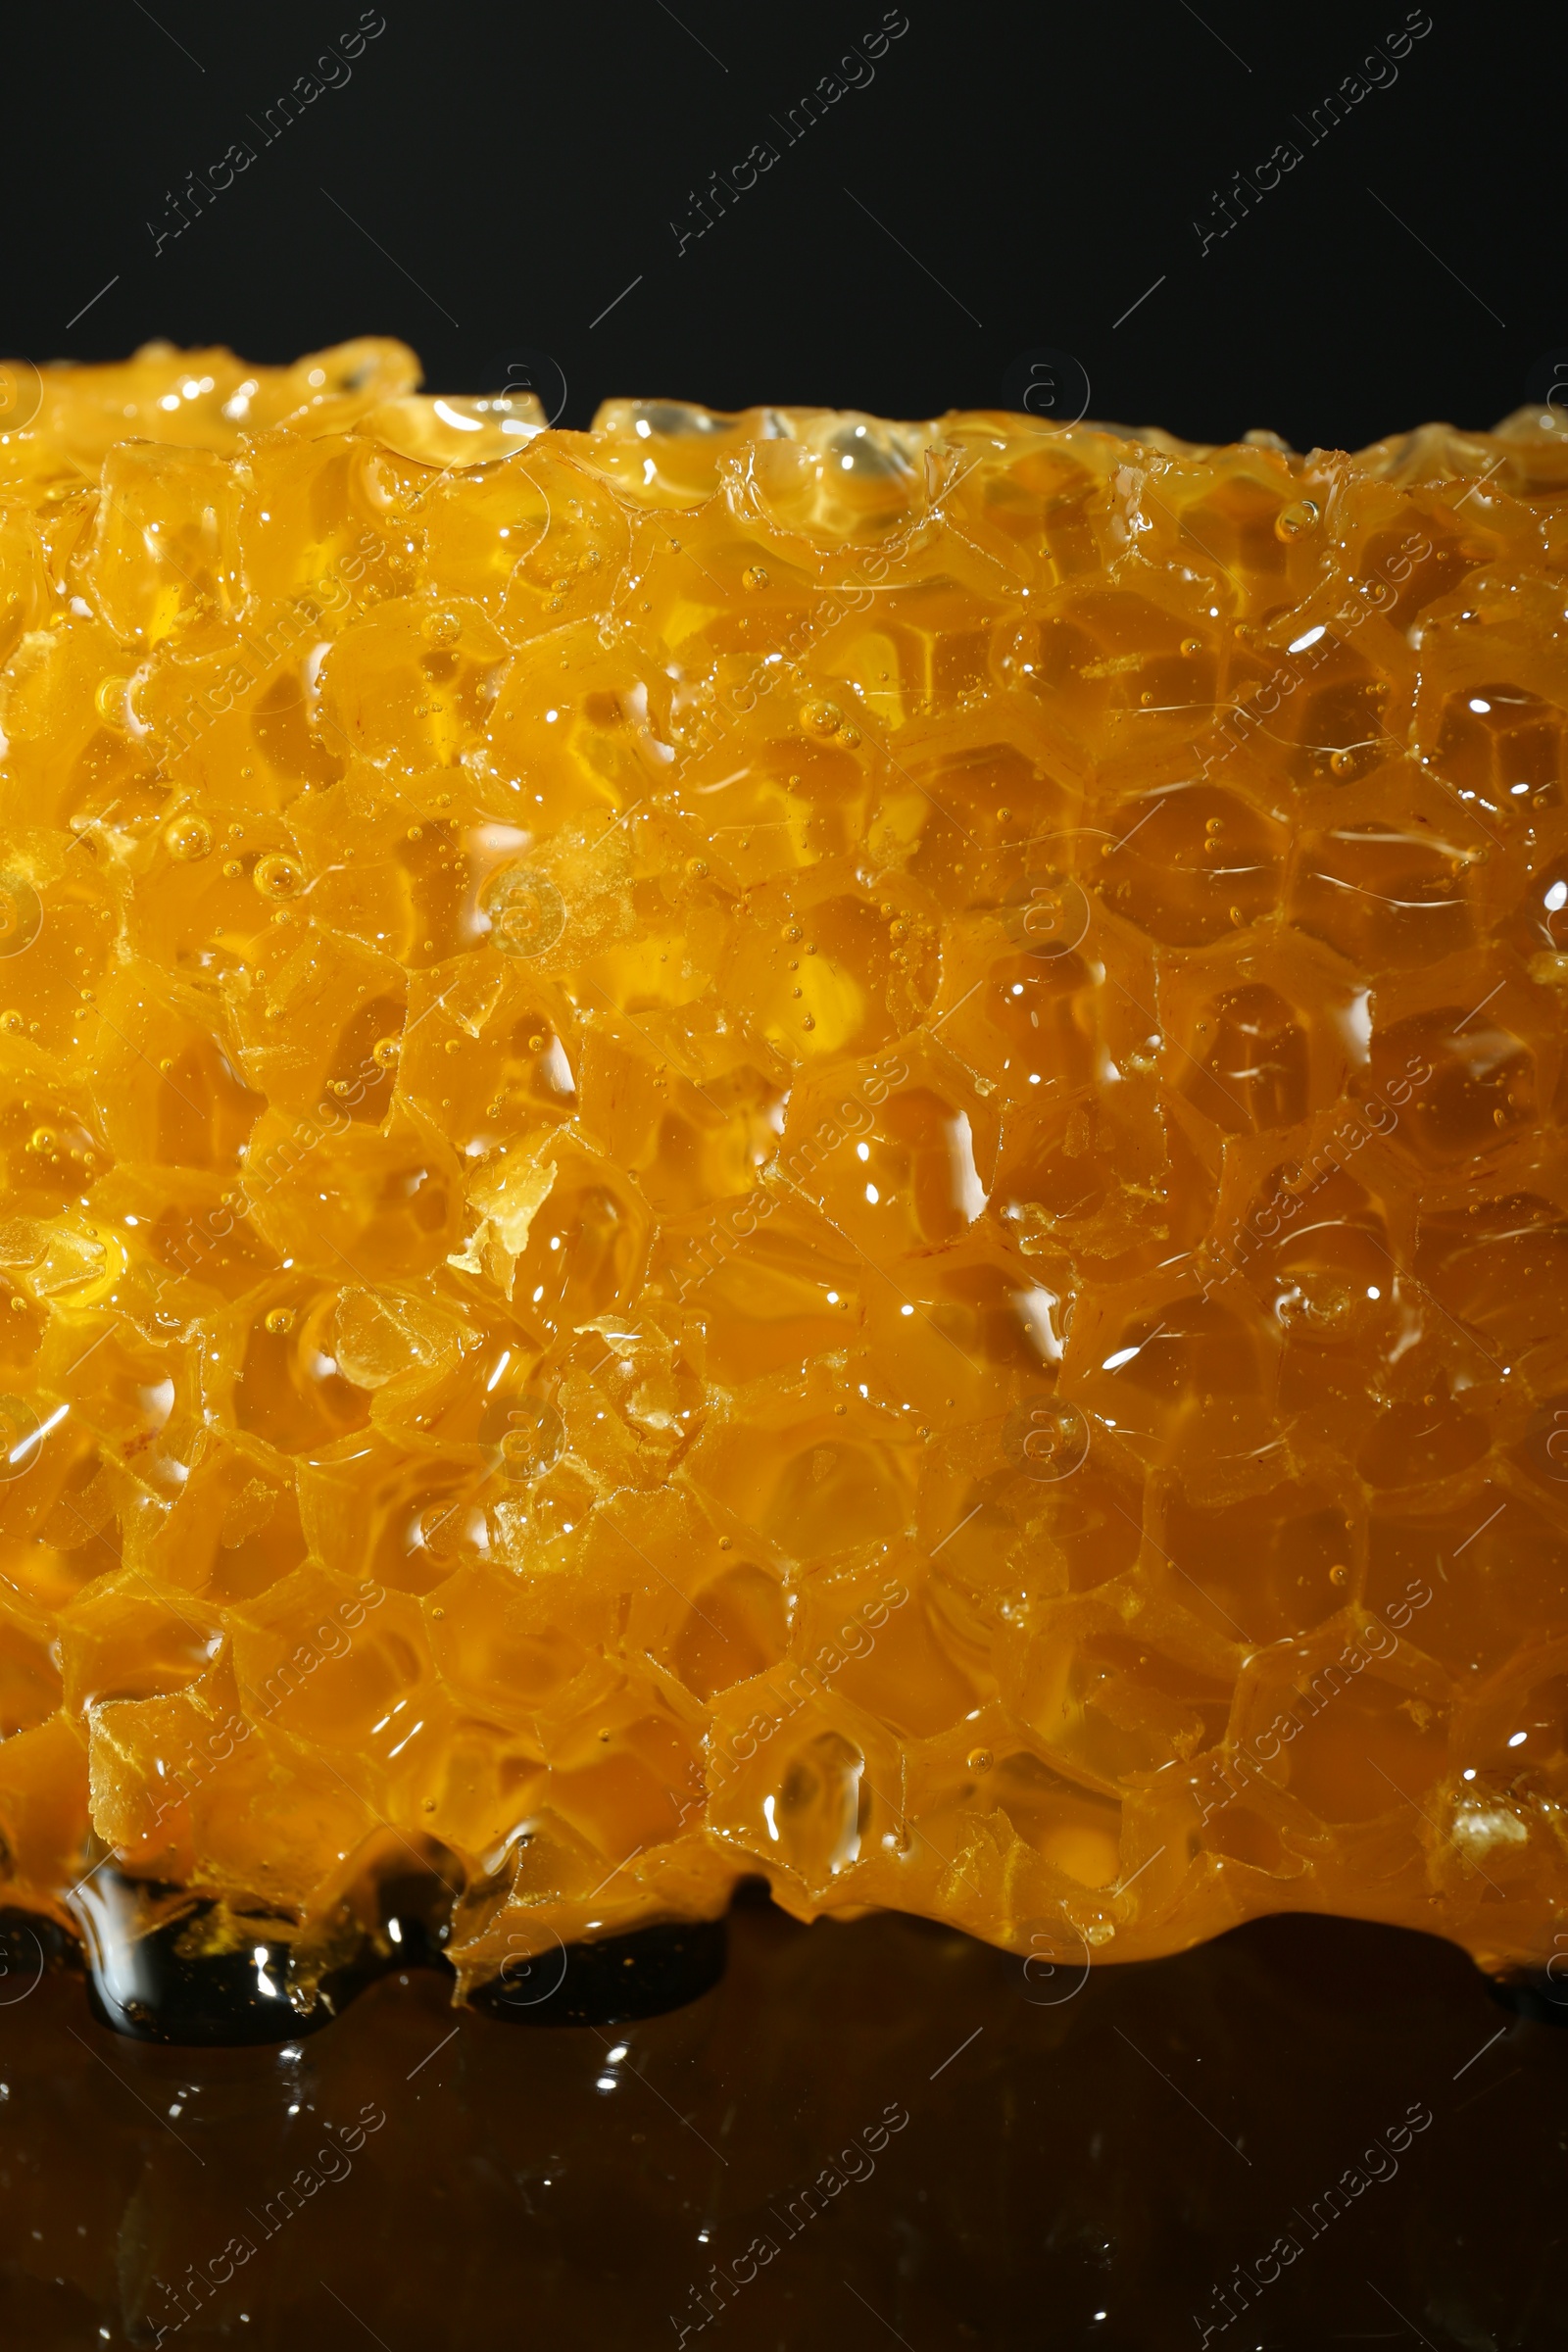 Photo of Piece of natural honeycomb with tasty honey on black background, closeup